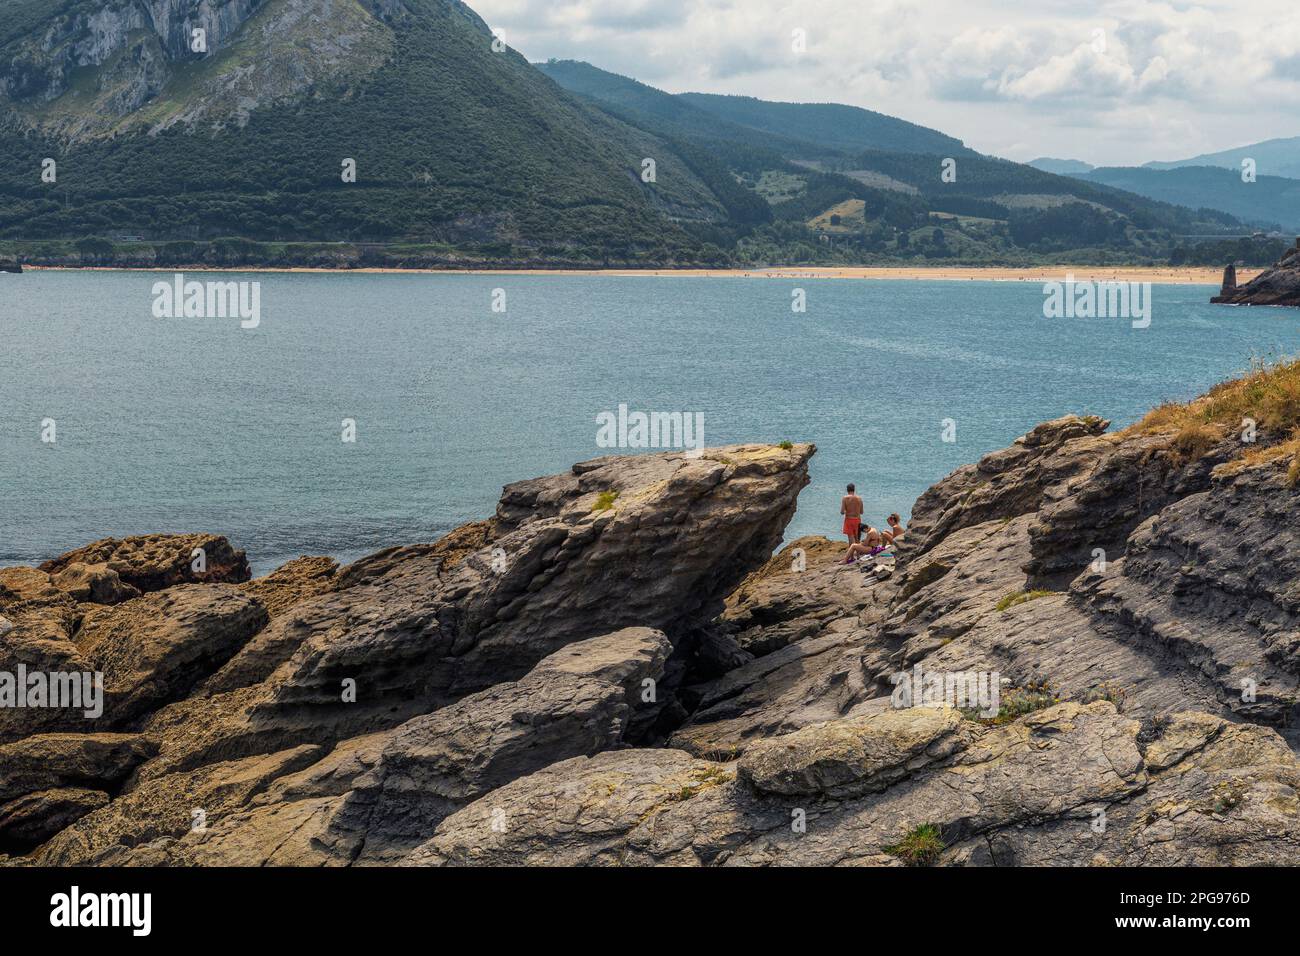 two young women and a man sunbathing in swimsuits on the rocks of the town of Sonabia, the Cantabrian Sea and the mountains in the background, Spa Stock Photo